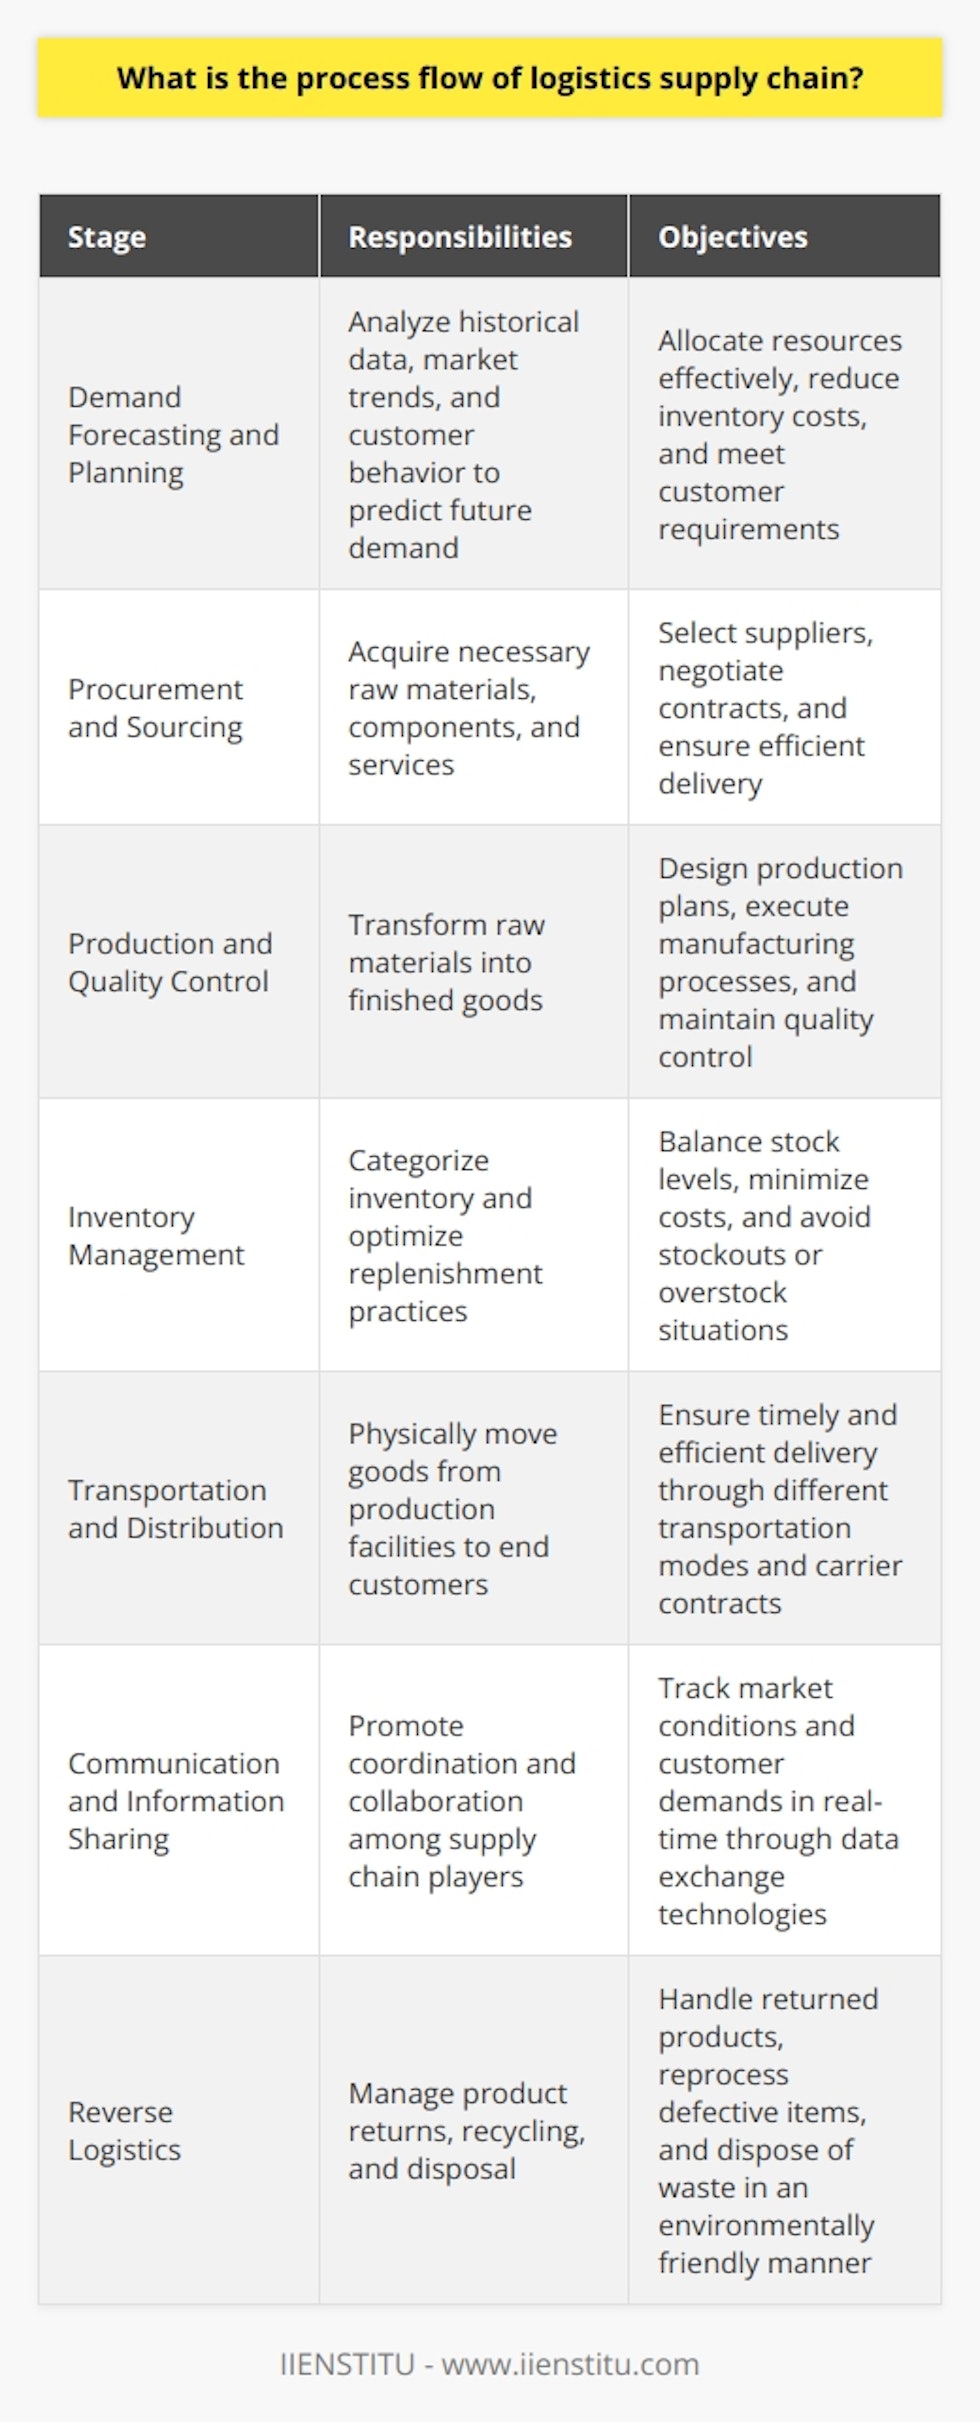 The logistics supply chain process flow is a crucial part of ensuring that products are delivered efficiently and cost-effectively from the manufacturer to the end consumer. It involves several stages, each with its own unique responsibilities and objectives.The first stage is demand forecasting and planning. This involves analyzing historical data, market trends, and customer behavior to accurately predict future demand. This information helps companies allocate resources effectively, reduce inventory costs, and meet customer requirements.Once demand is forecasted, the procurement and sourcing stage begins. This involves acquiring the necessary raw materials, components, and services to produce finished products. It includes selecting appropriate suppliers, negotiating contracts, and monitoring supplier performance to ensure efficient delivery of materials.The next stage is production and quality control. Here, raw materials are transformed into finished goods. Production plans are designed, manufacturing processes are executed, and quality control measures are put in place to meet customer expectations.Efficient inventory management is a crucial stage in balancing stock levels and minimizing costs. Inventory is categorized based on turnover rates, demand patterns, and other variables. This helps optimize replenishment practices and reduce stockouts or overstock situations.Transportation and distribution involve the physical movement of goods from production facilities to storage facilities, retailers, and end customers. Different transportation modes such as road, air, rail, and water are utilized, along with negotiated carrier contracts, to ensure timely and efficient delivery.Effective communication and information sharing are essential in promoting coordination and collaboration among supply chain players. Real-time data exchange using technologies like electronic data interchange (EDI) or radio frequency identification (RFID) enables companies to track and respond to changing market conditions and customer demands.The final stage is reverse logistics, which involves managing product returns, recycling, or disposal. This includes handling returned products, reprocessing defective items, and disposing of waste in an environmentally friendly manner.In conclusion, the logistics supply chain process flow is a complex system that requires continuous monitoring, analysis, and adaptation. By effectively managing each stage, companies can enhance operational efficiency and maintain a competitive advantage in the market.